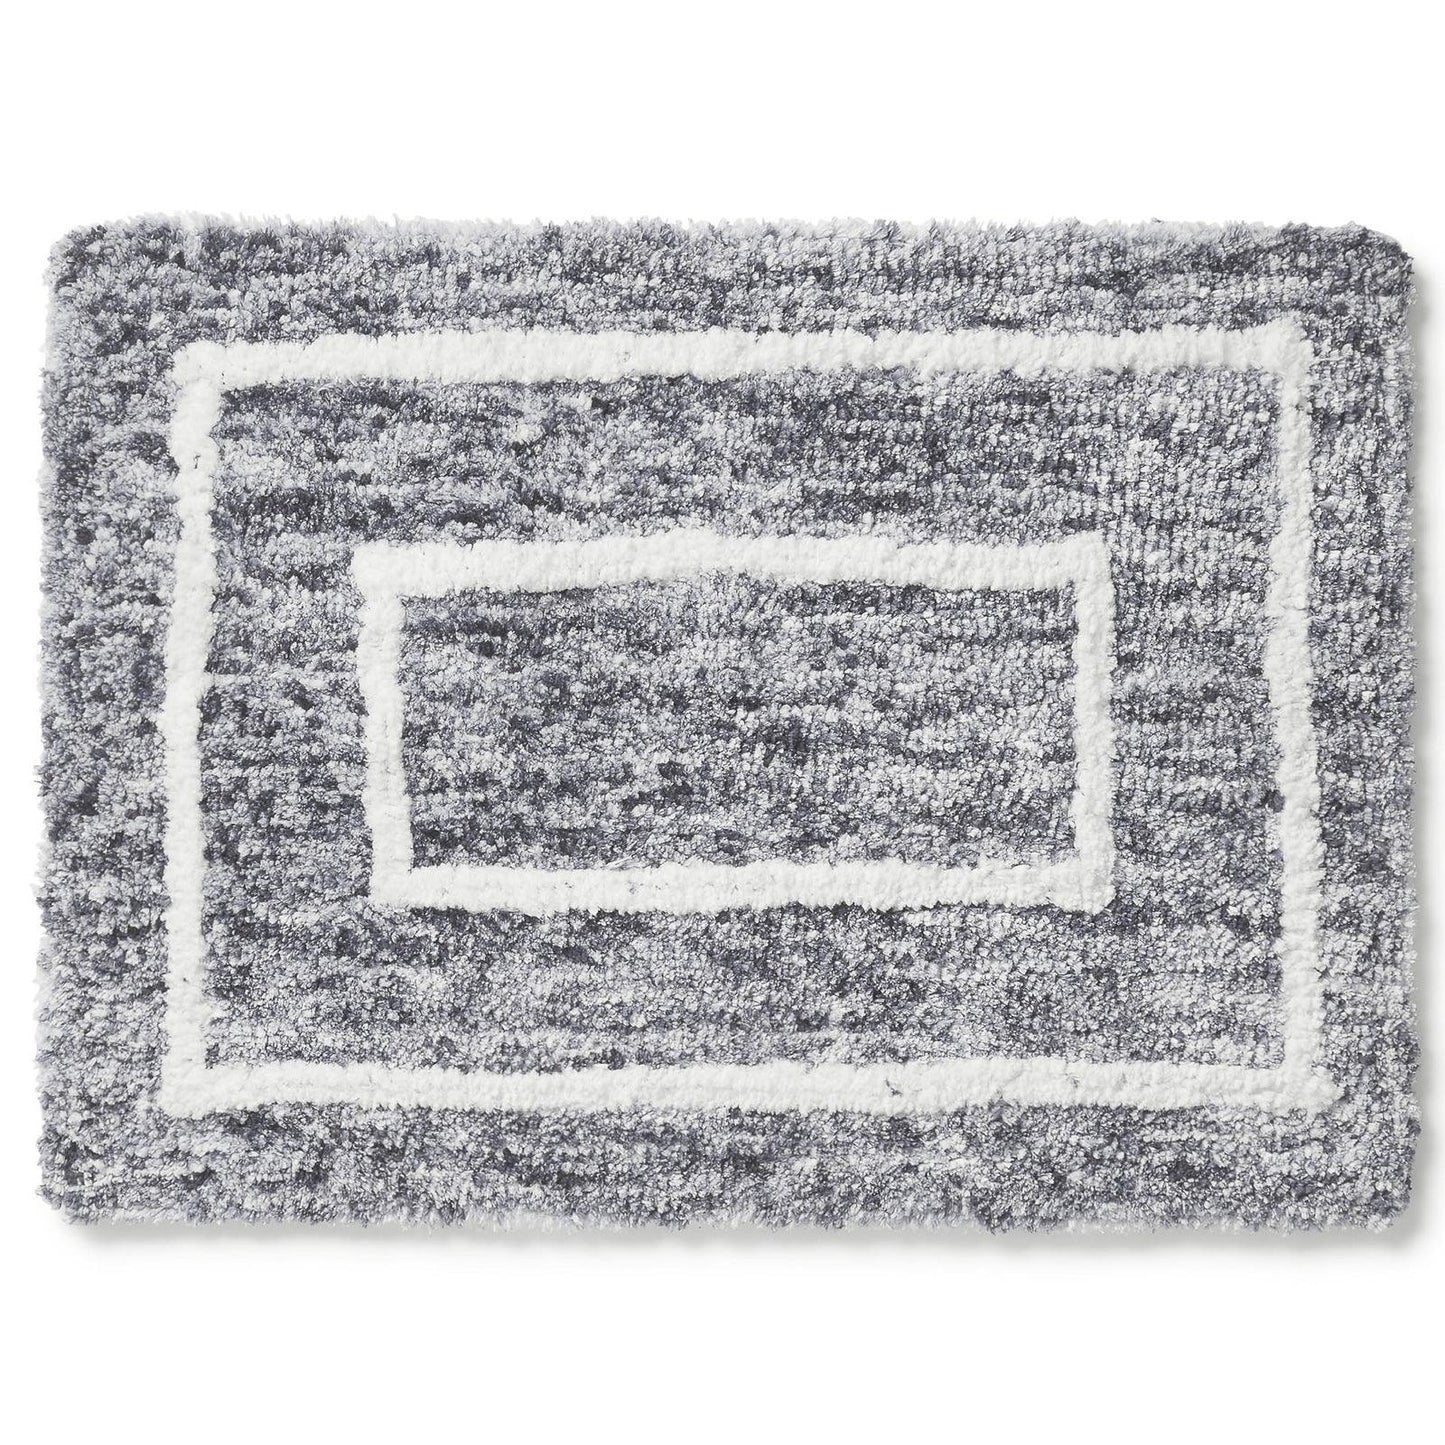 Soft and Absorbent Tufted Bath Mat - 17x24 Inches - Double Rectangle Pattern - Home > Home & Living > Bathroom > Bath Mats & Rugs - Americanflat